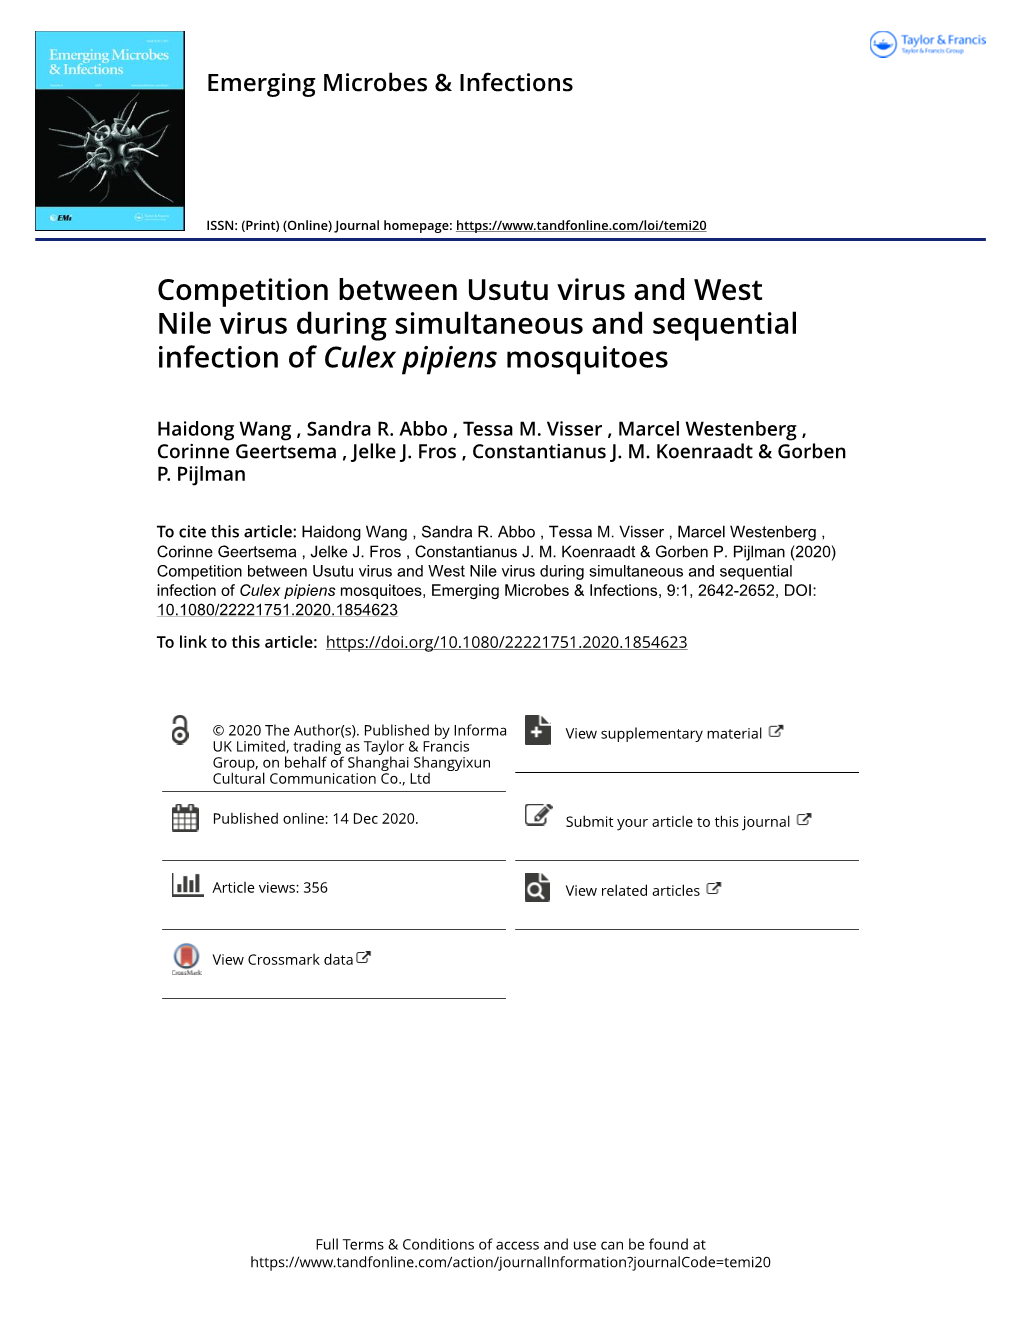 Competition Between Usutu Virus and West Nile Virus During Simultaneous and Sequential Infection of Culex Pipiens Mosquitoes